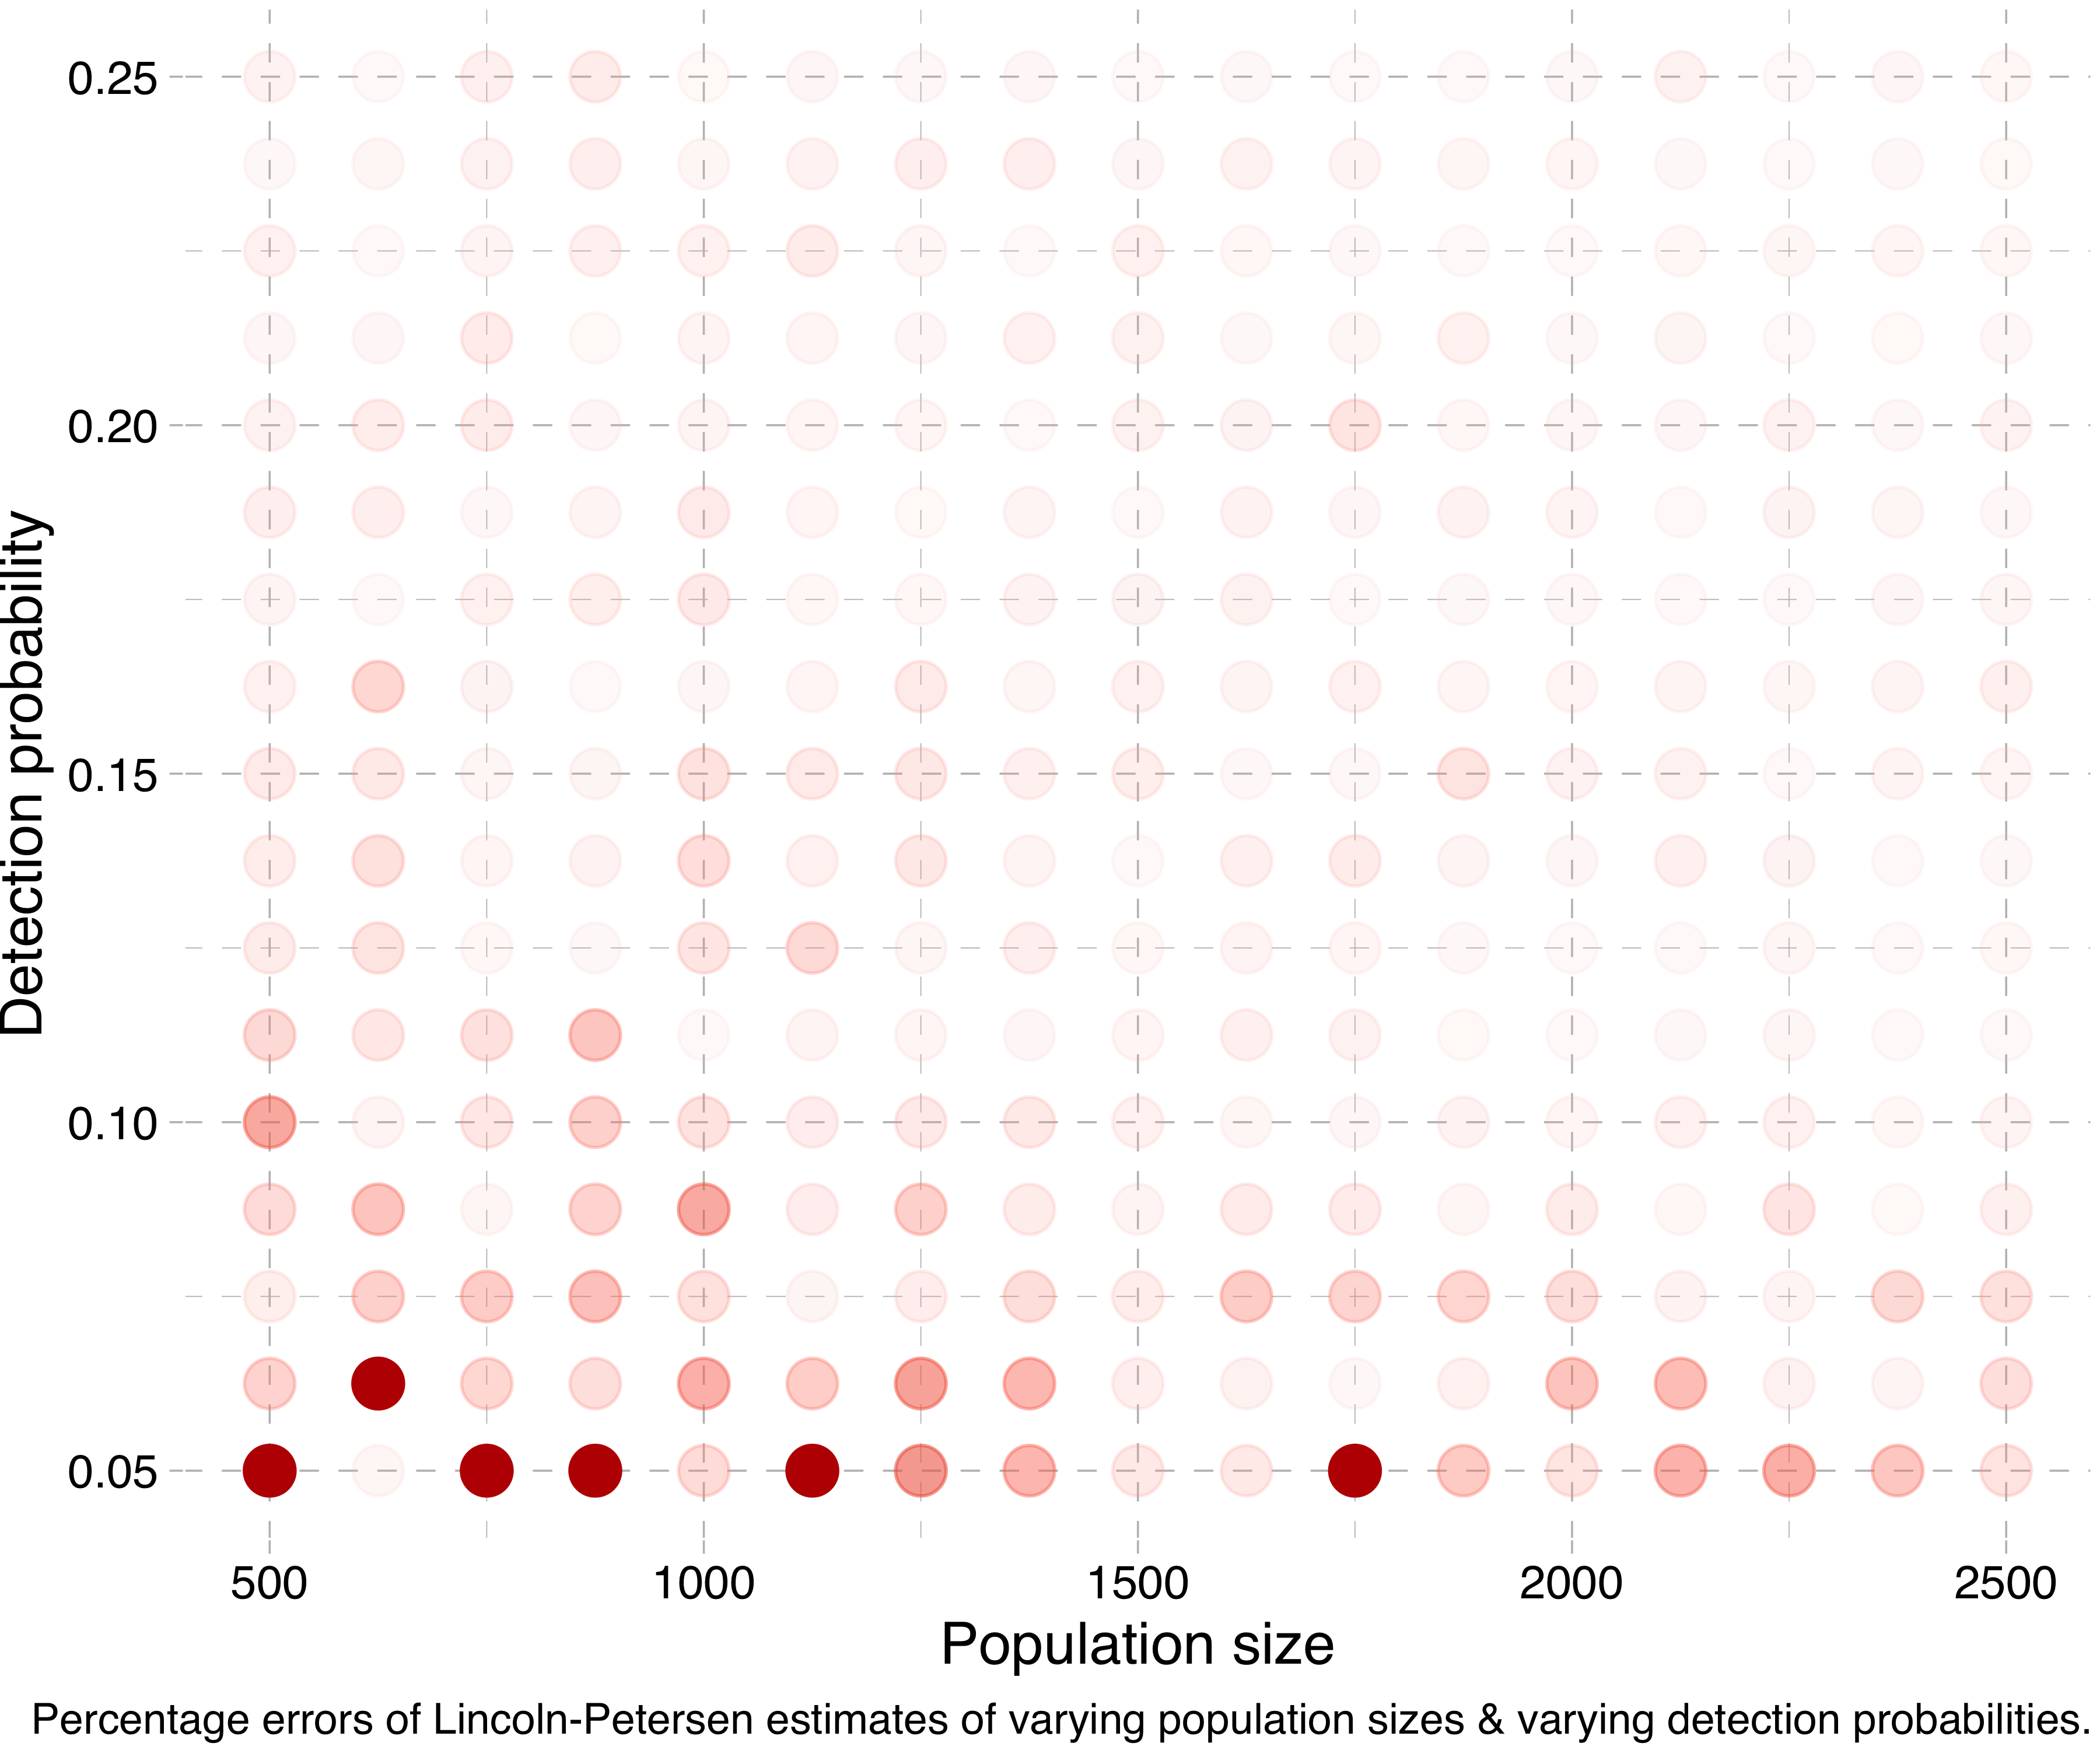 Percentage errors of Lincoln-Petersen estimates of varying population sizes and varying detection probabilities.